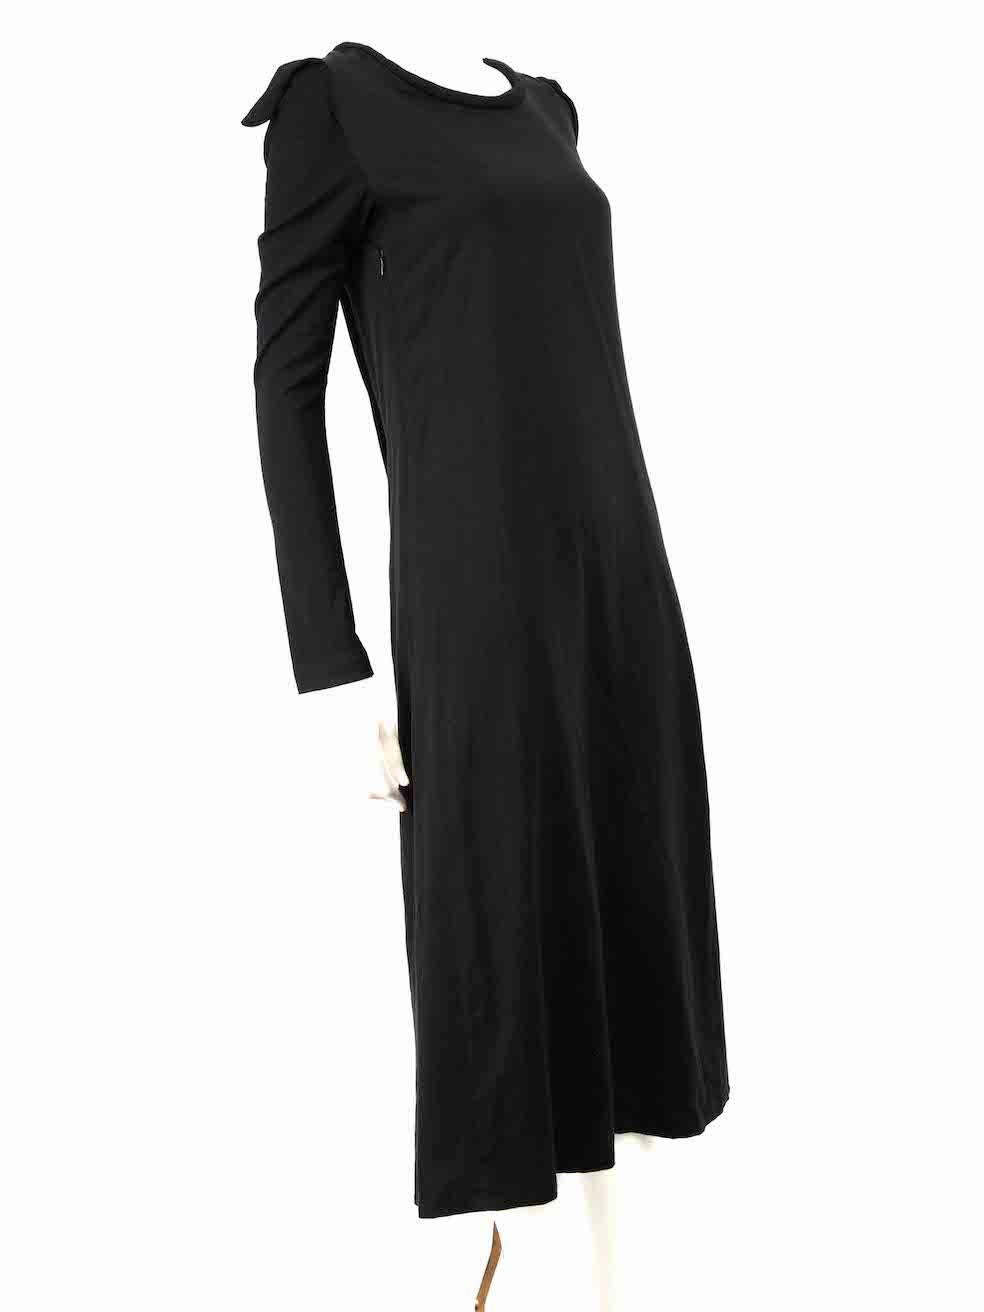 CONDITION is Very good. Hardly any visible wear to dress is evident on this used Yohji Yamamoto designer resale item.
 
 
 
 Details
 
 
 Black
 
 Cotton
 
 Dress
 
 Long sleeves
 
 Midi
 
 Buttoned detail on skirt
 
 Round neck
 
 Side zip